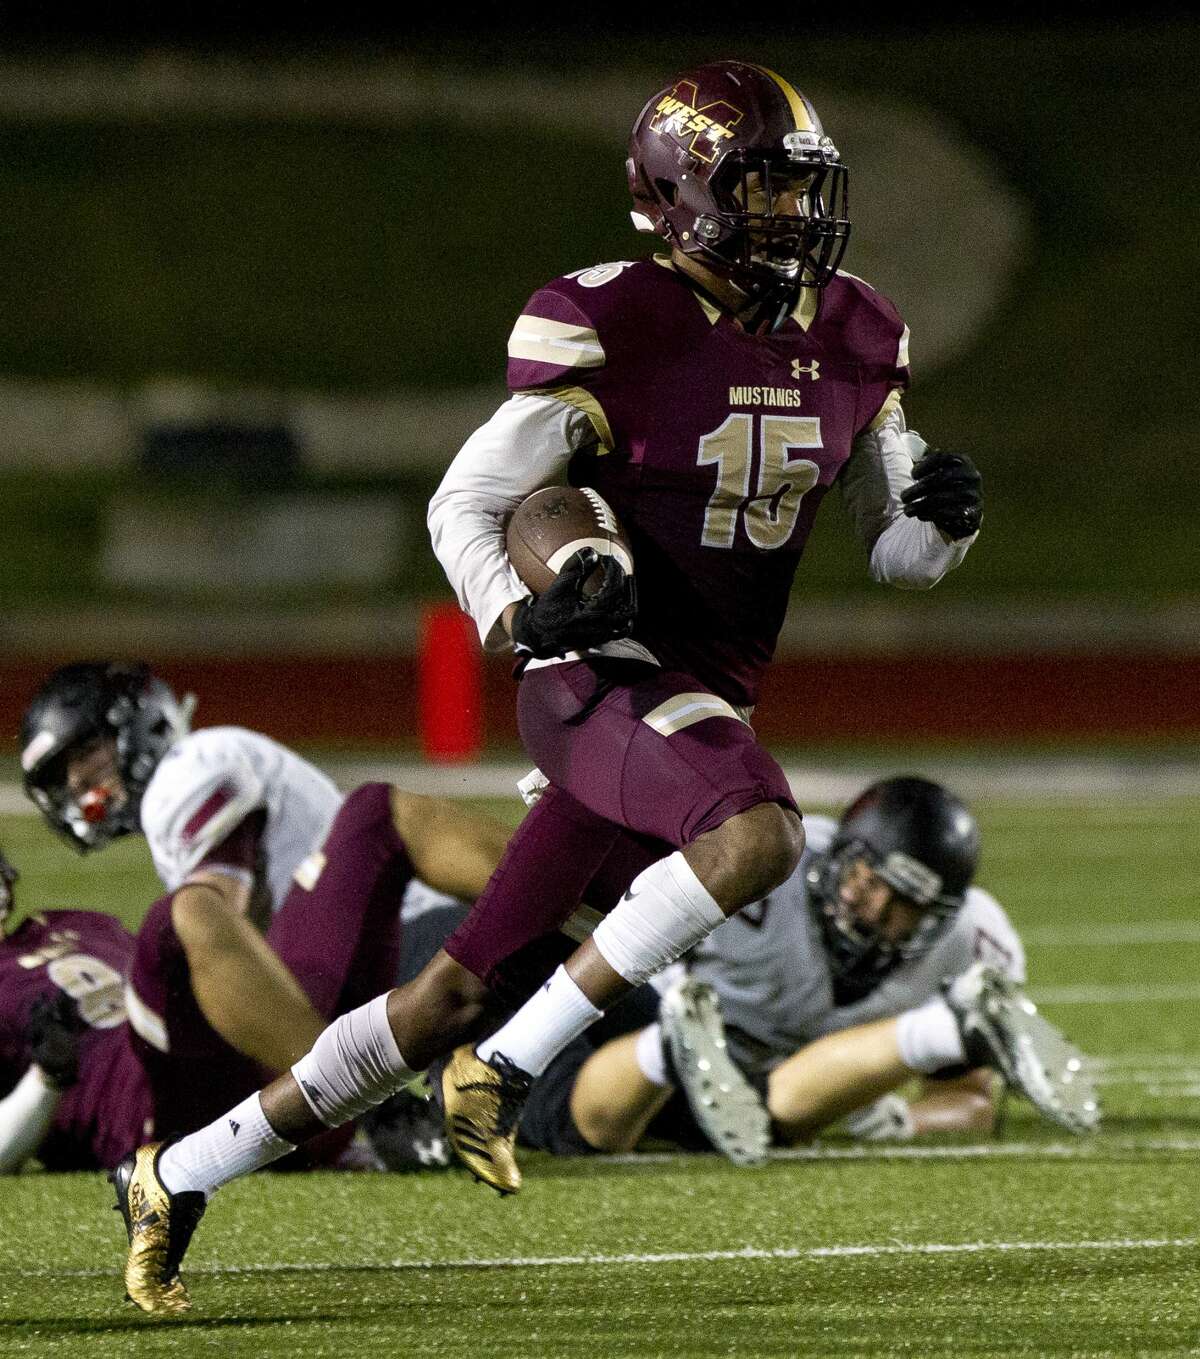 Magnolia West cornerback Ryan Franks (15) return the ball after intercepting a pass from Rouse quarterback Ethan Moore (18) during the second quarter of a Region III-5A bi-district high school football game at Merrill Green Stadium, Friday, Nov. 17, 2017, in Bryan.